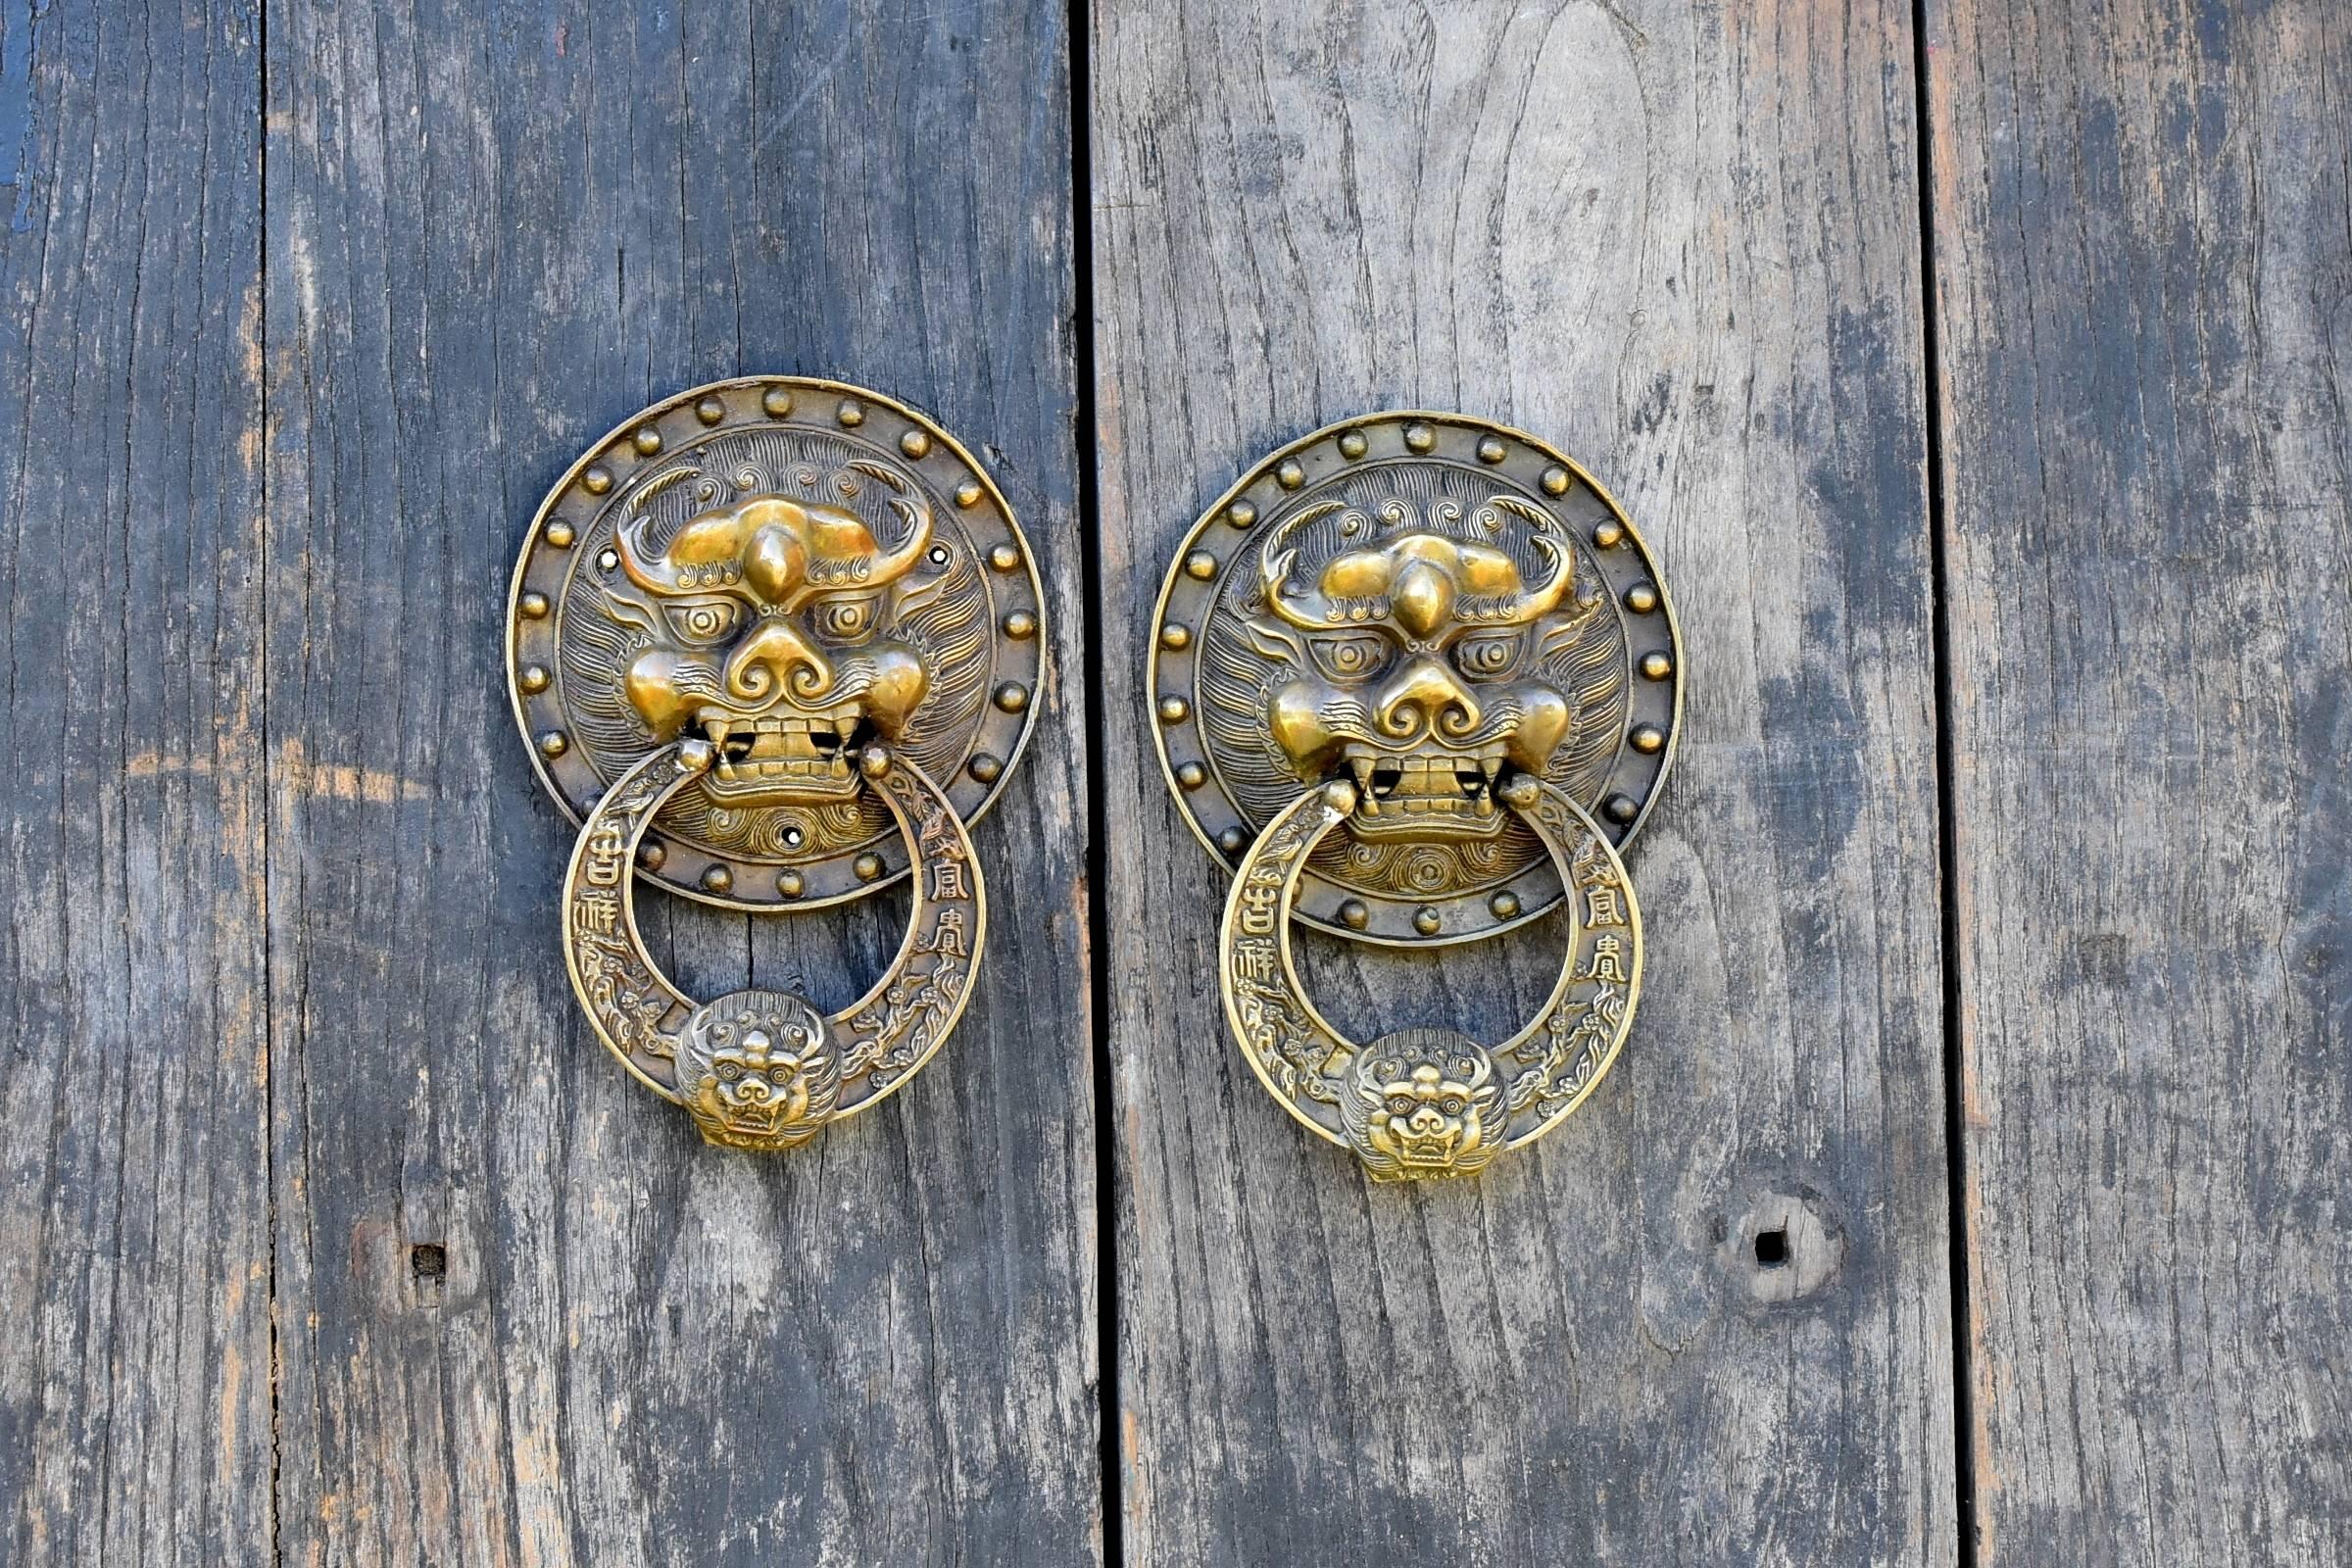 Chinese Rustic Antique Doors with Brass Knockers